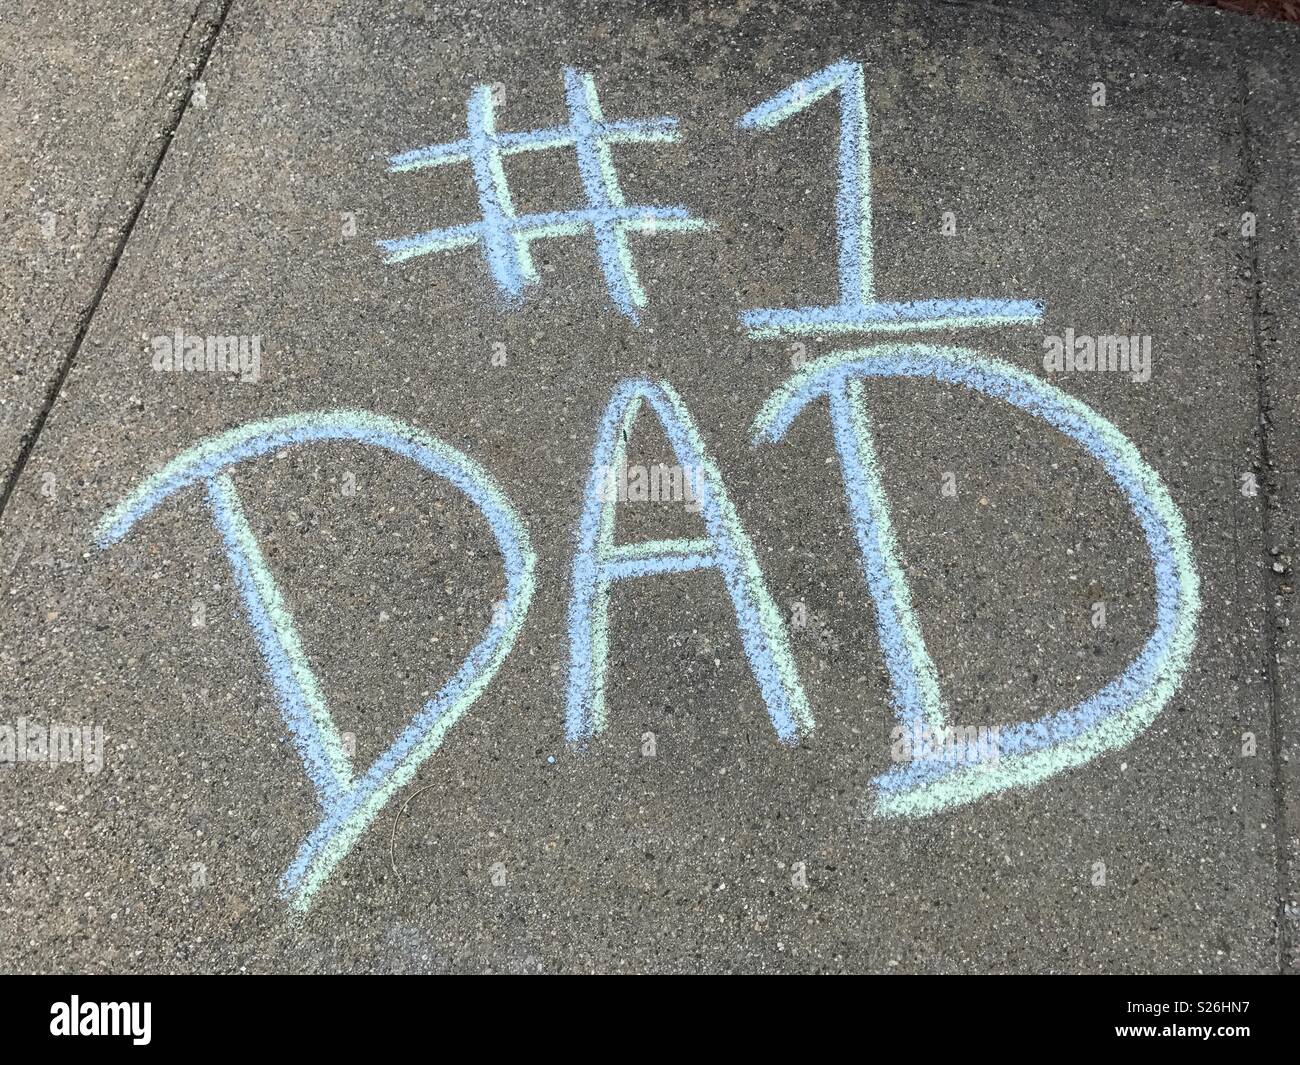 #1 Dad in chalk Stock Photo